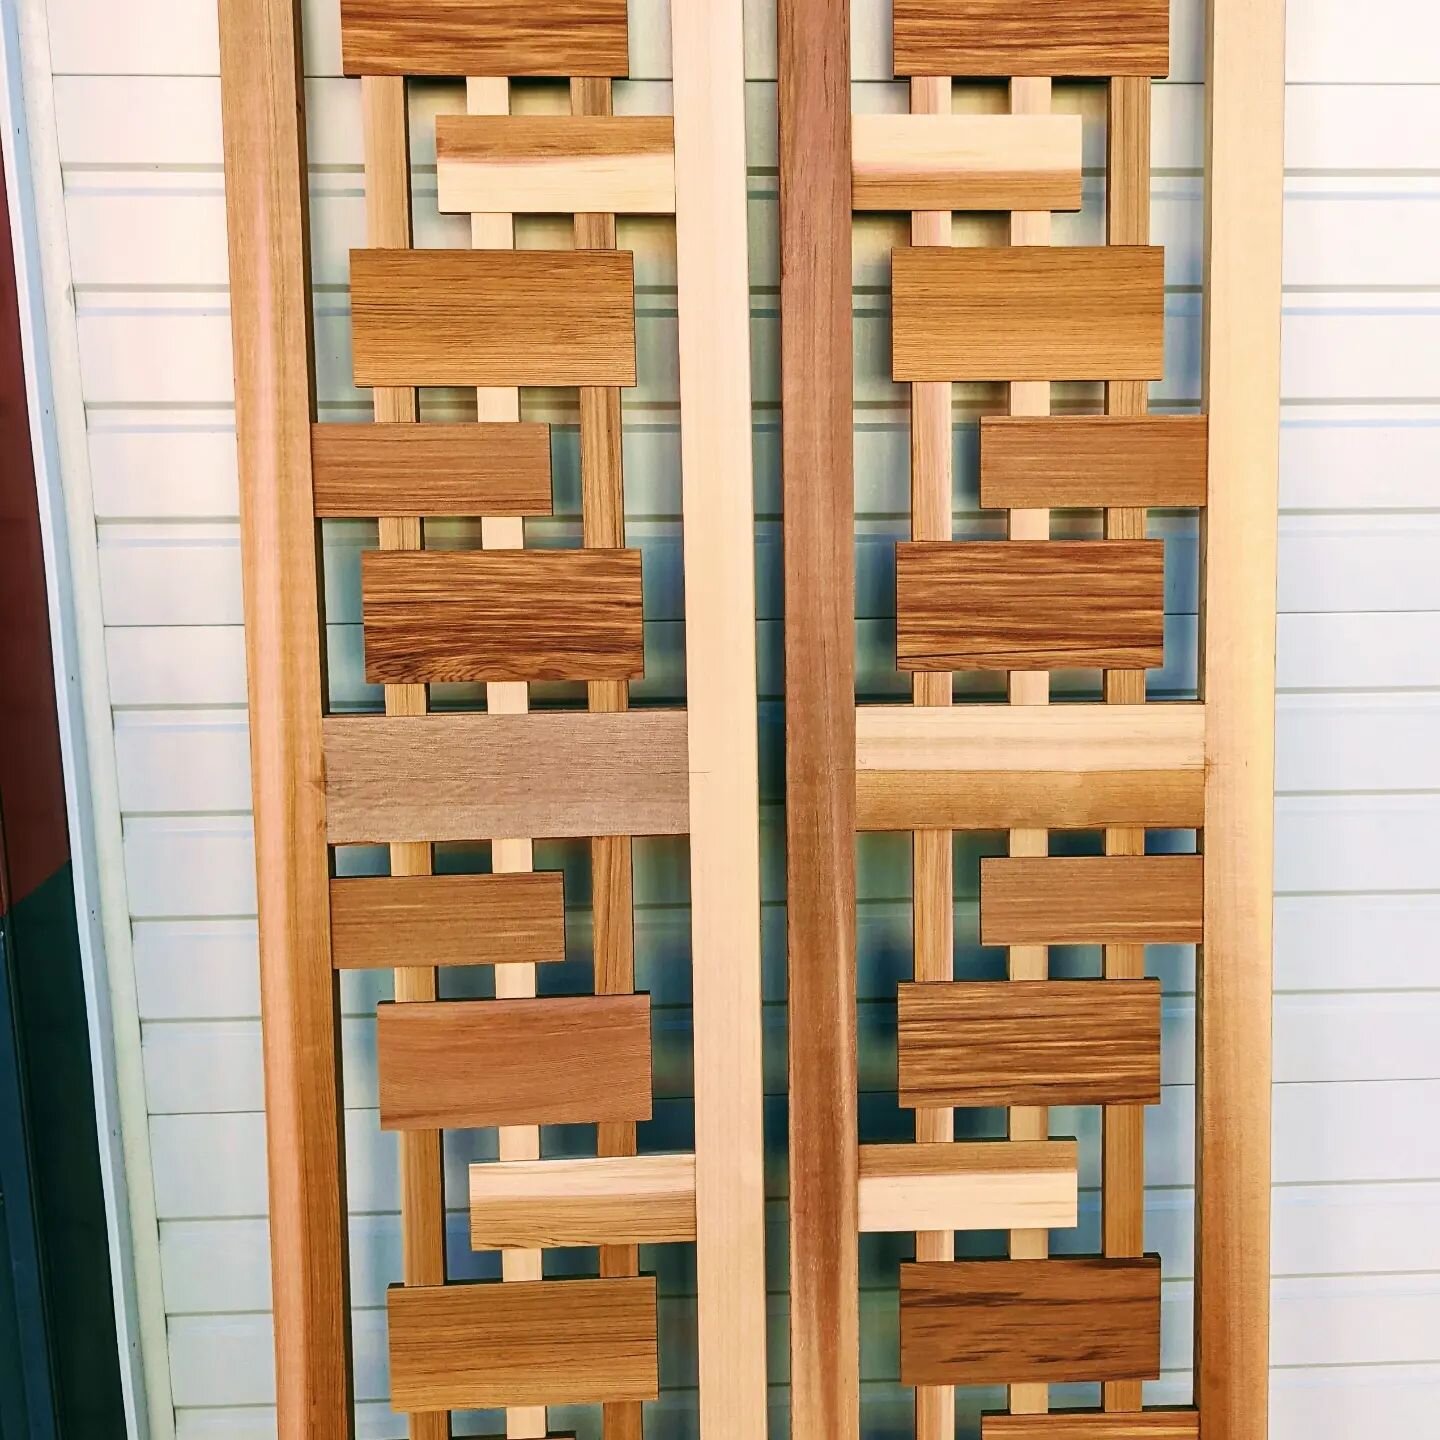 A custom order from a client wanting to use our Jigsaw Gate design for an interior  application  in their MCM house. Our designs translate easily into screens and room dividers as well!